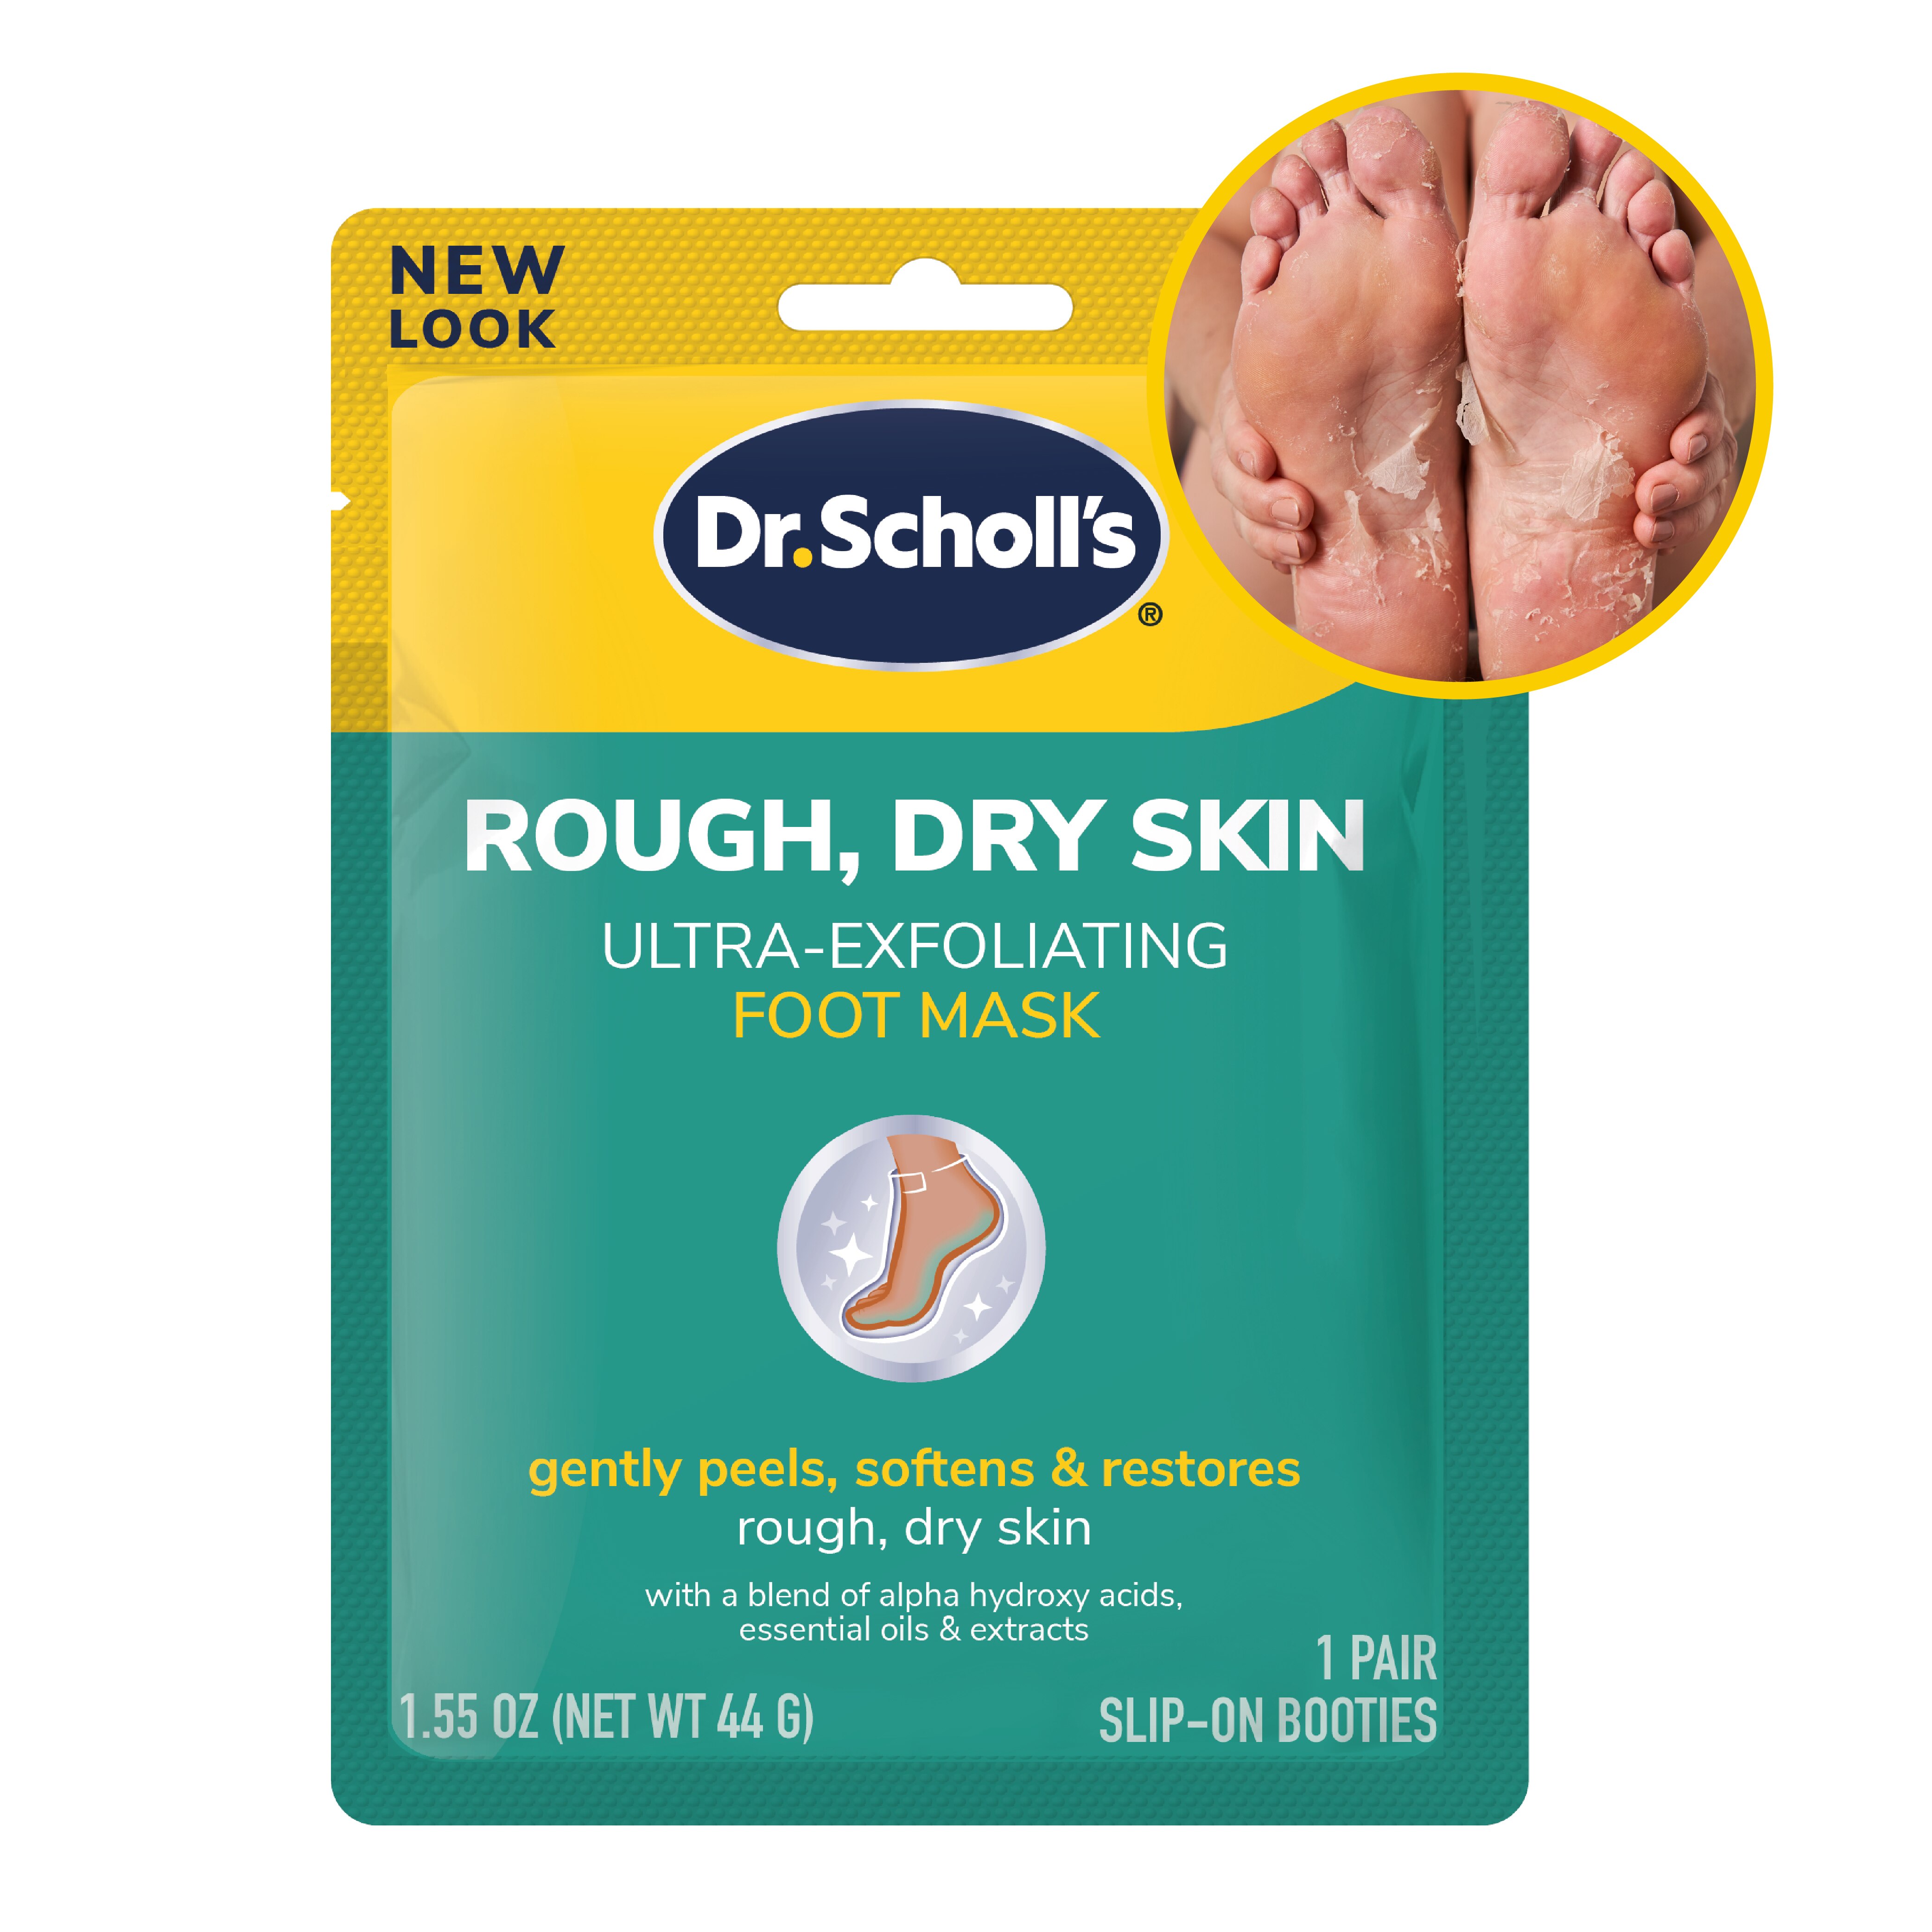 Dr. Scholl's Ultra Exfoliating Foot Mask